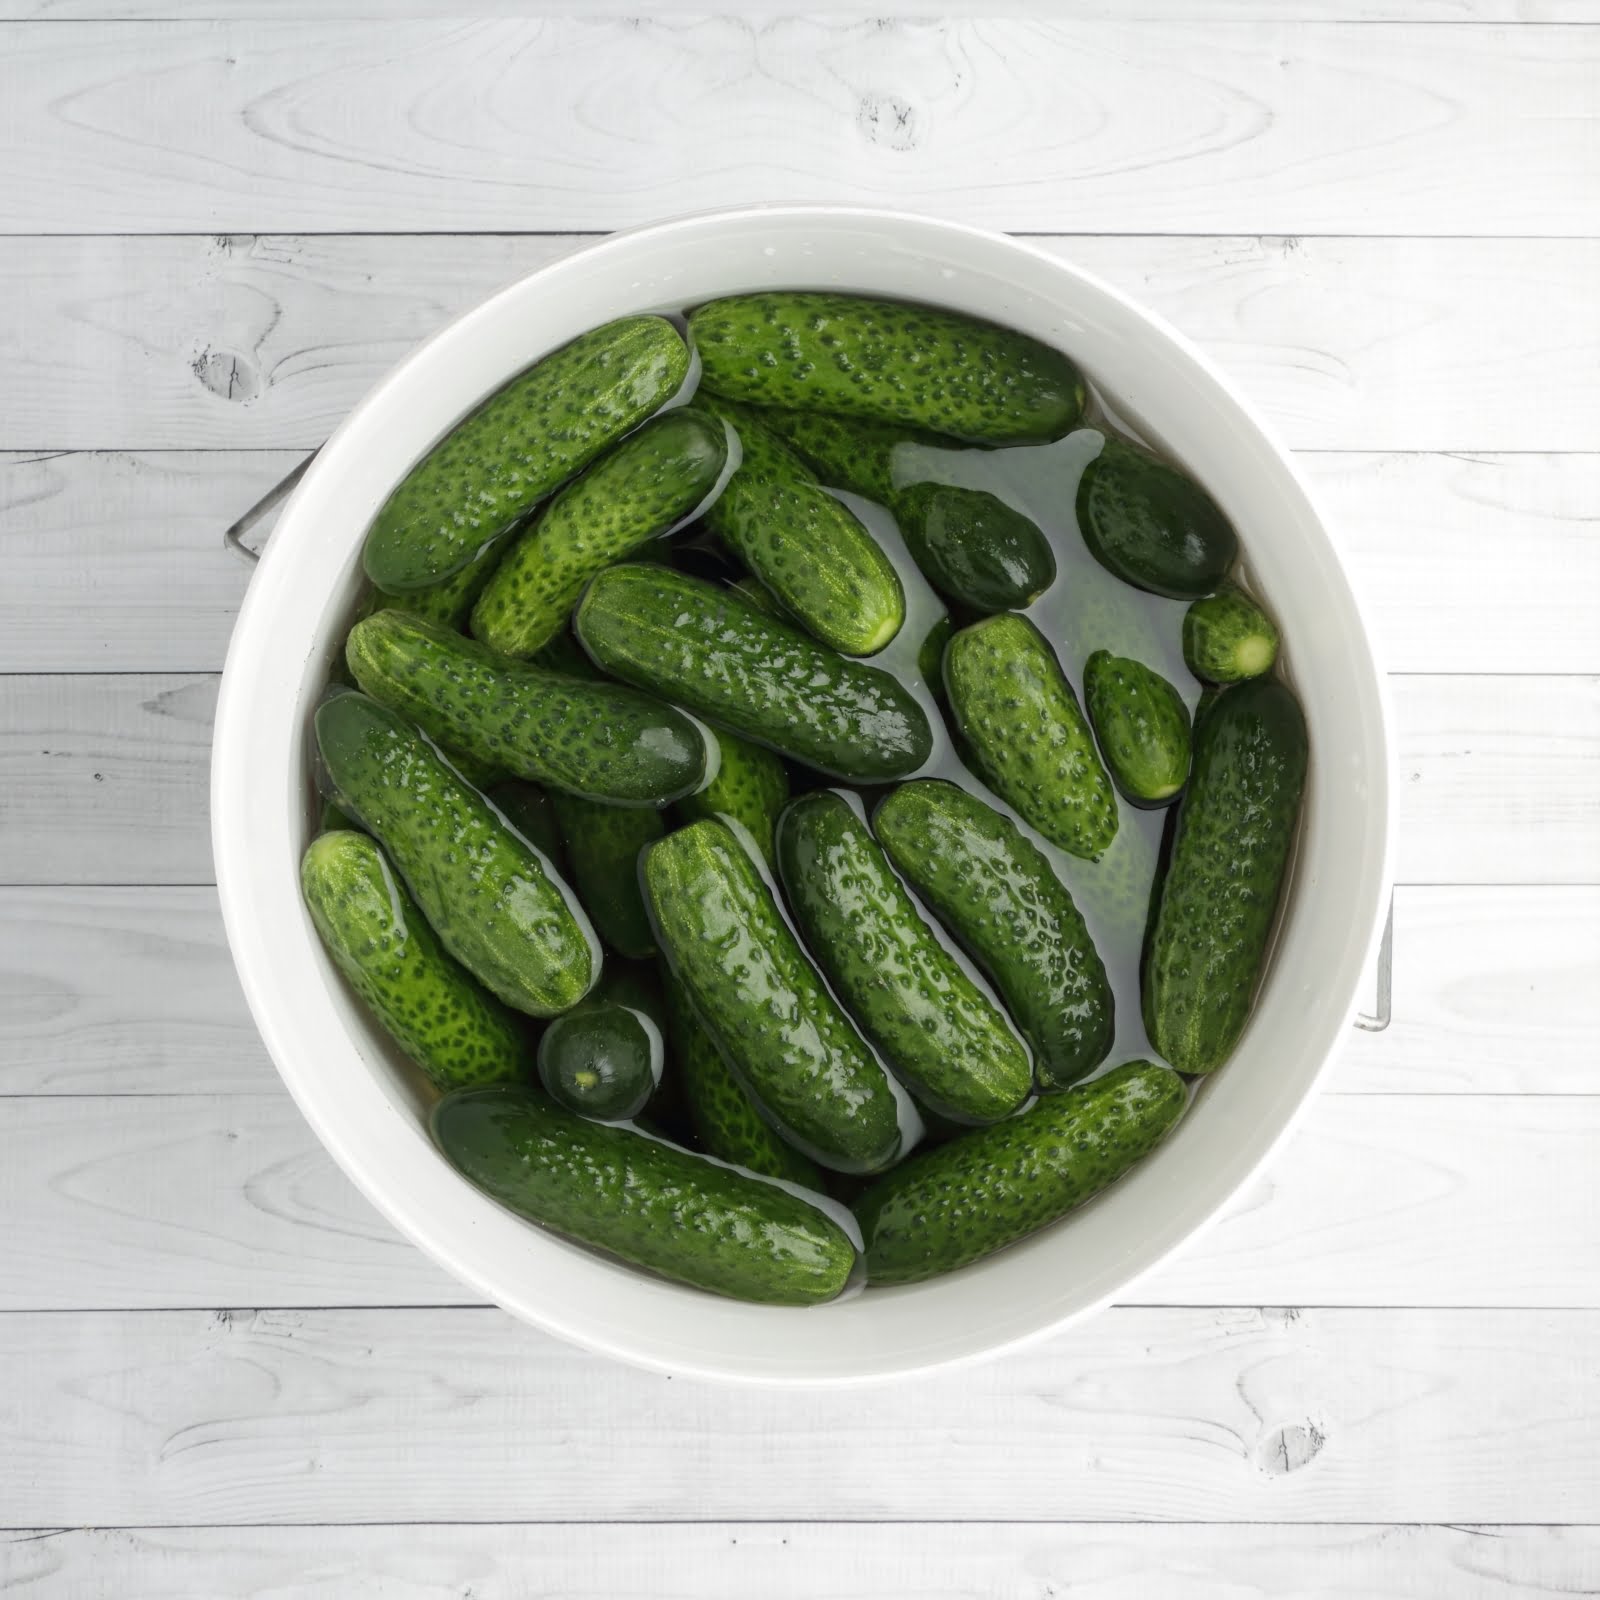 Sweet and sour gherkins recipe wet brining the cucumbers in a salt solution